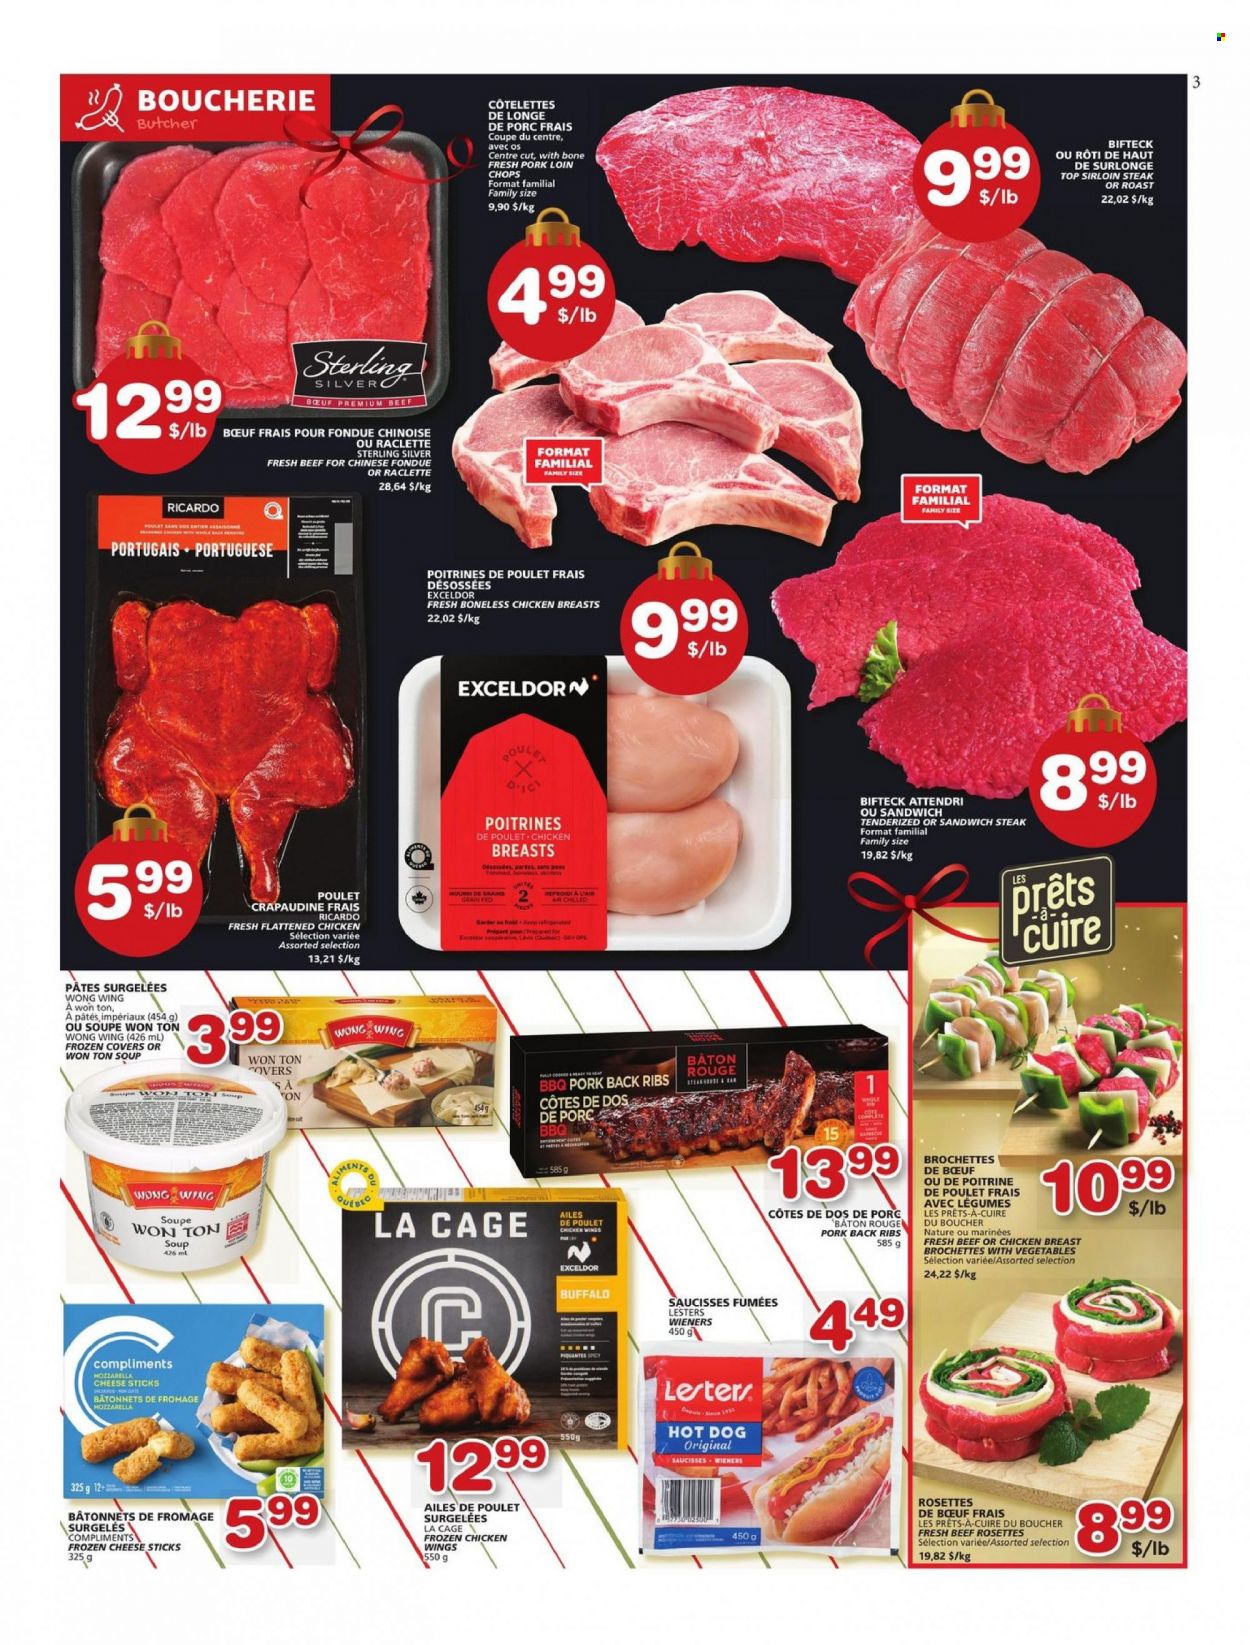 thumbnail - Les Marchés Tradition Flyer - November 24, 2022 - November 30, 2022 - Sales products - hot dog, sandwich, soup, raclette cheese, cheese, chicken wings, cheese sticks, chicken breasts, chicken, beef sirloin, sirloin steak, pork chops, pork loin, pork meat, pork ribs, pork back ribs, mozzarella, steak. Page 3.